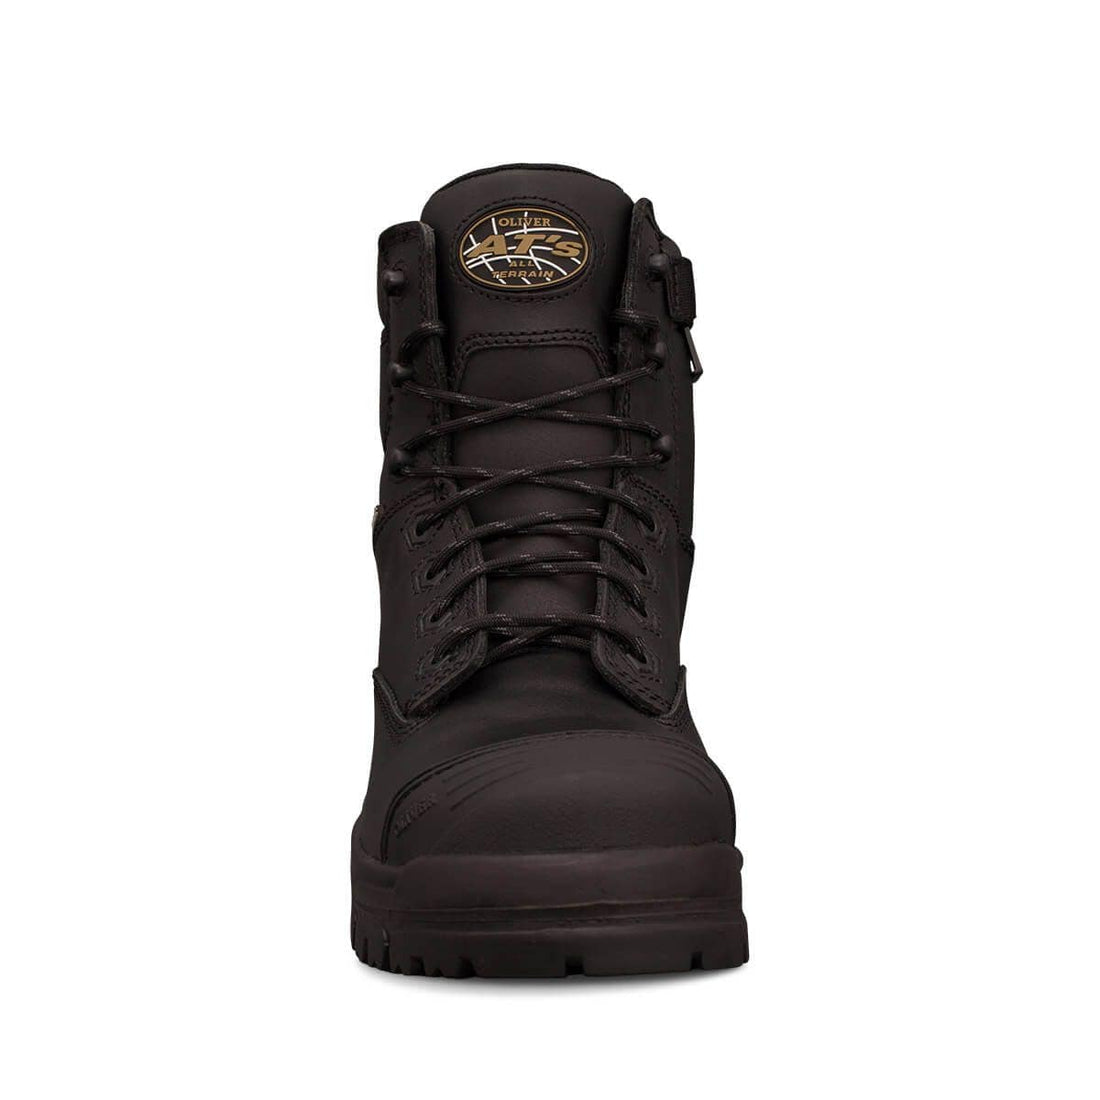 Oliver Composite Zip Sided Boot 45645Z